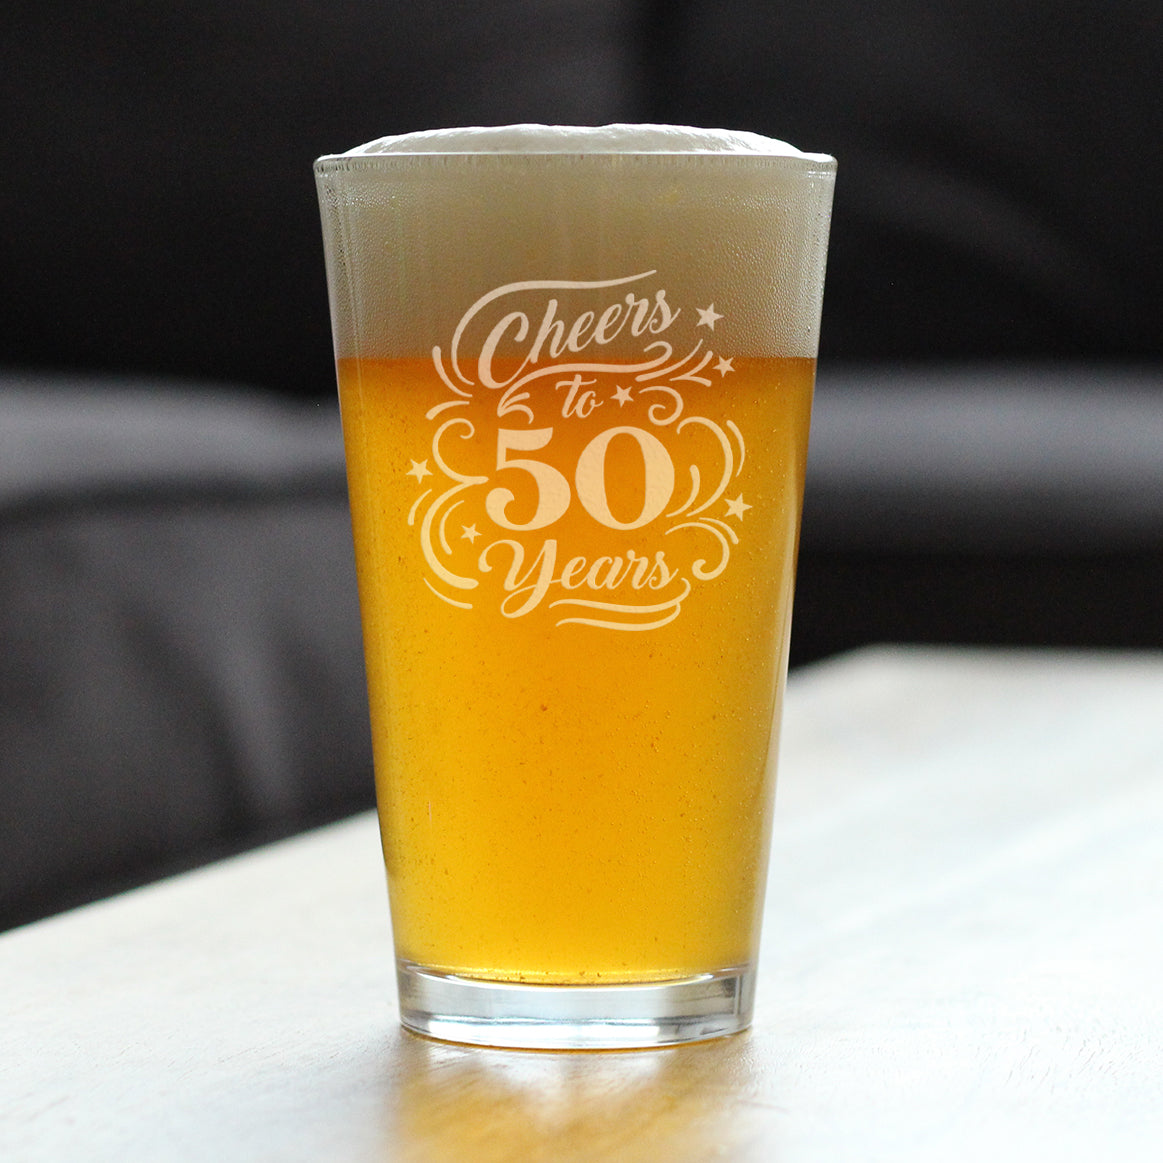 Cheers to 50 Years - Pint Glass for Beer - Gifts for Women &amp; Men - 50th Anniversary Party Decor - 16 Oz Glasses